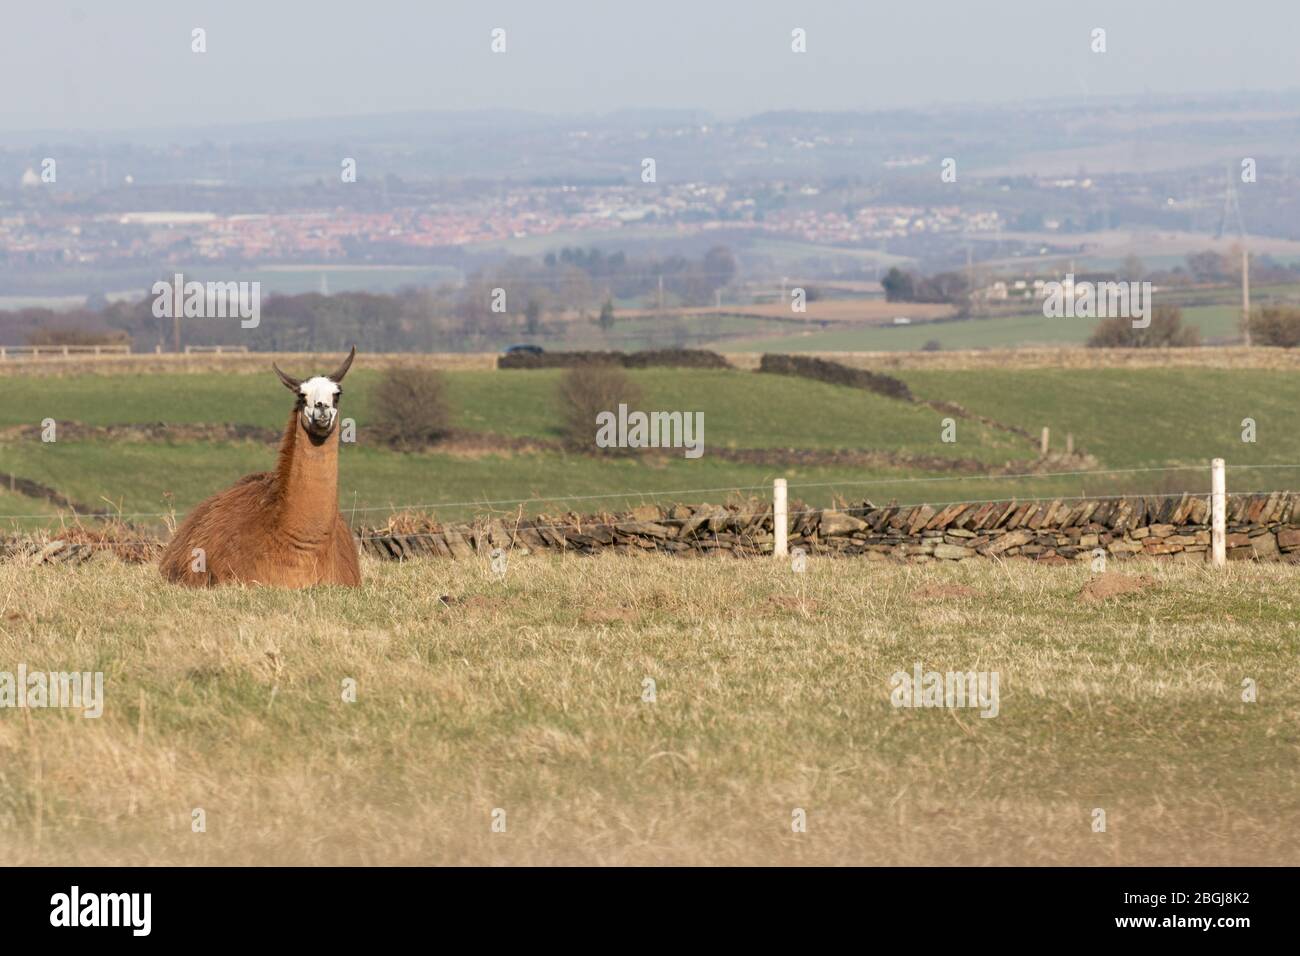 An alpaca relaxing in a field with open countryside behind Stock Photo